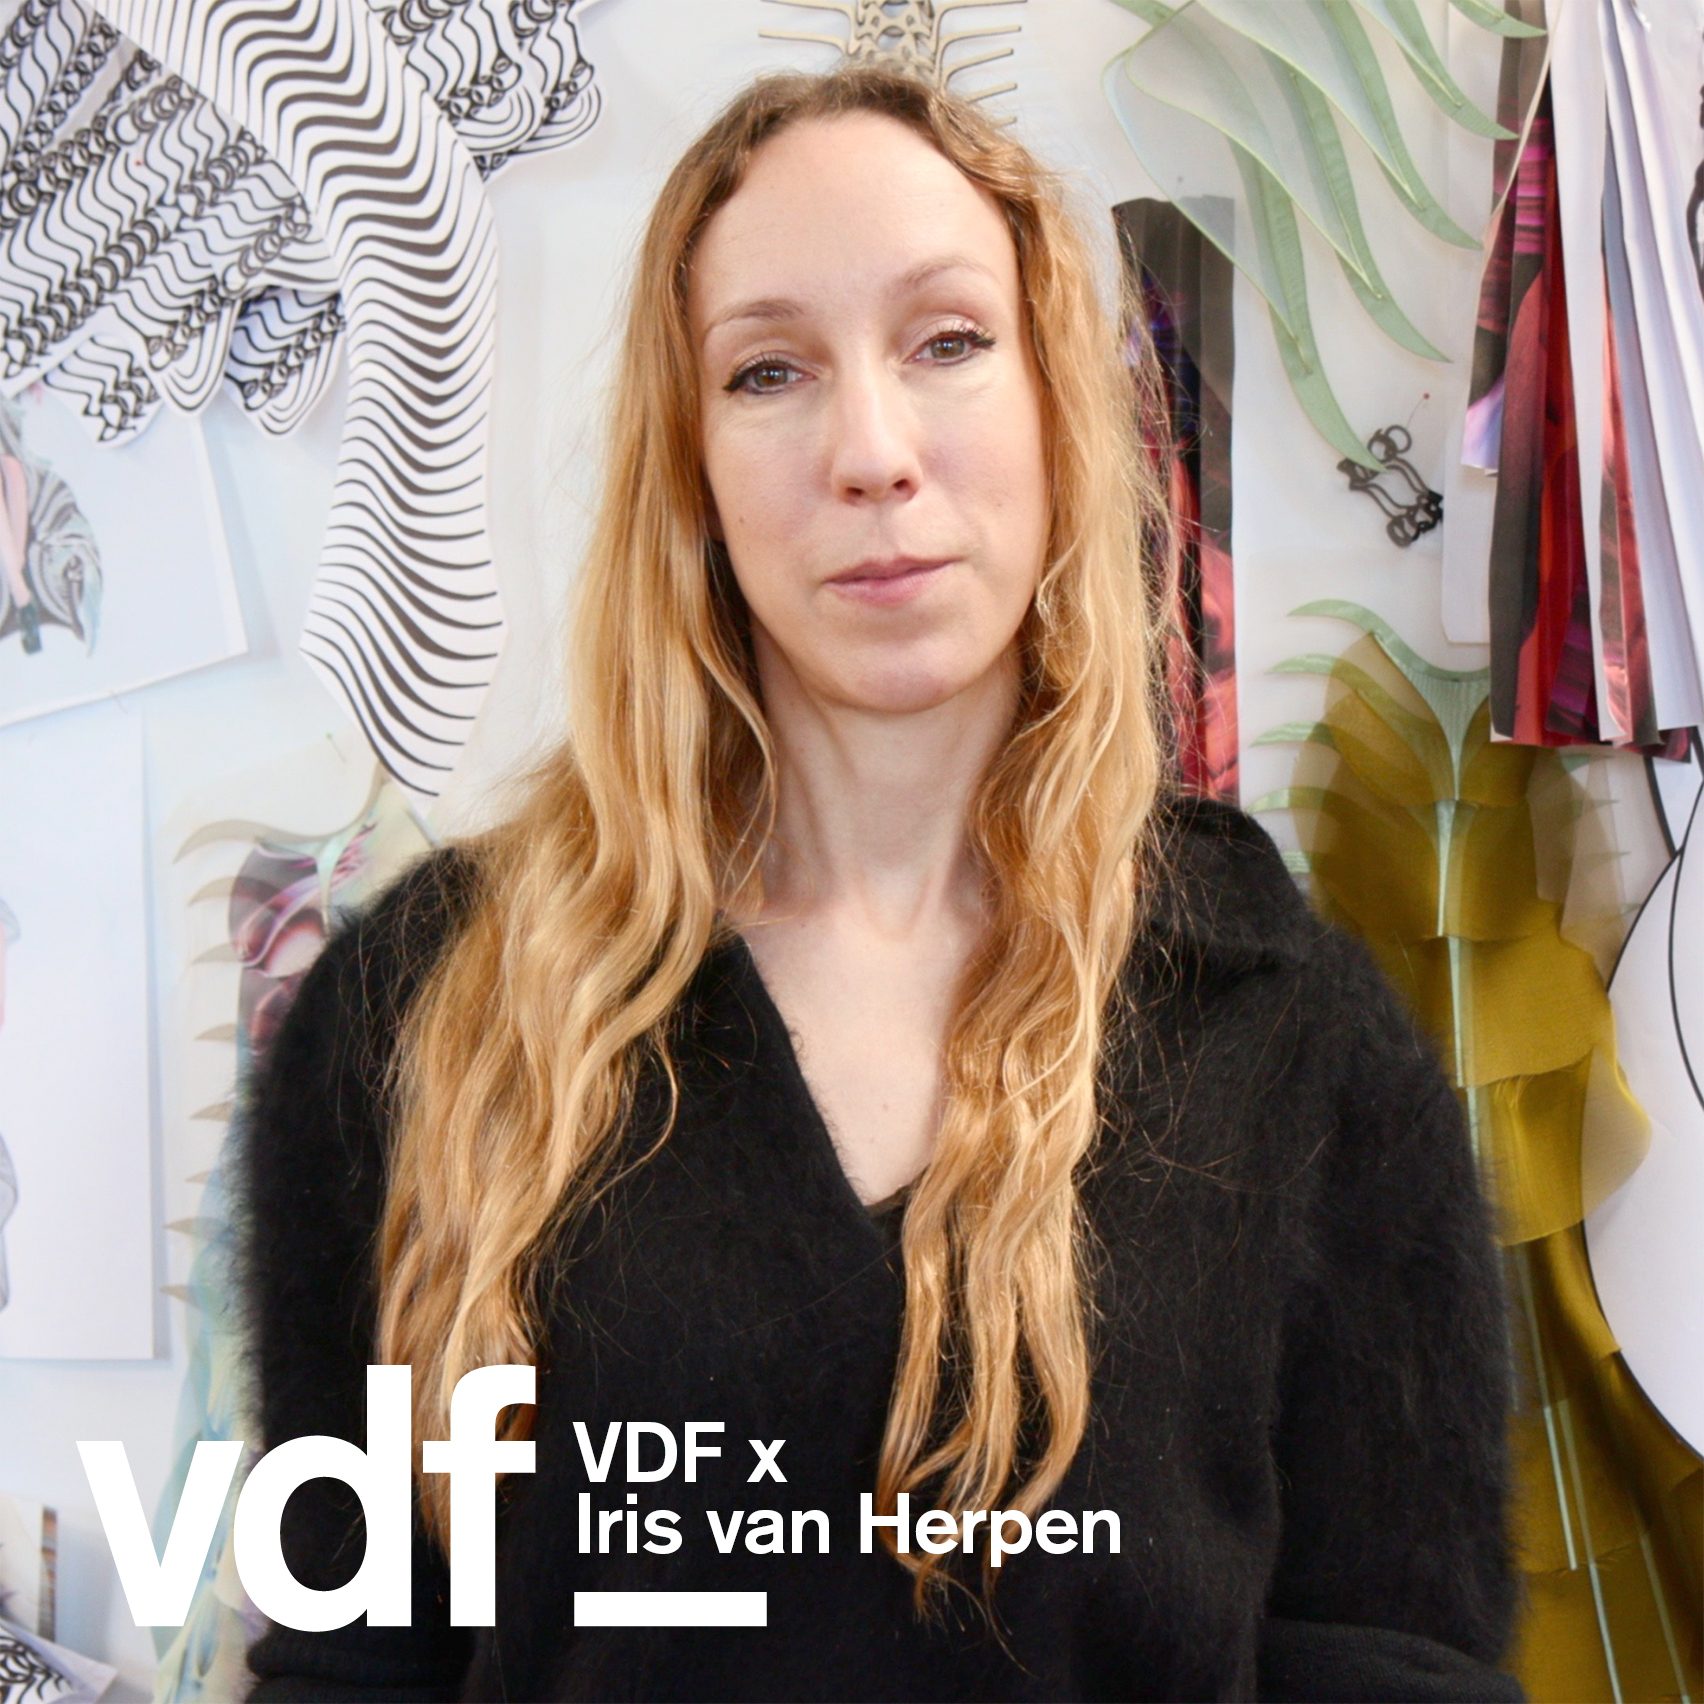 Architectural Knowledge Is Very Useful For Material Development In Fashion Says Iris Van Herpen